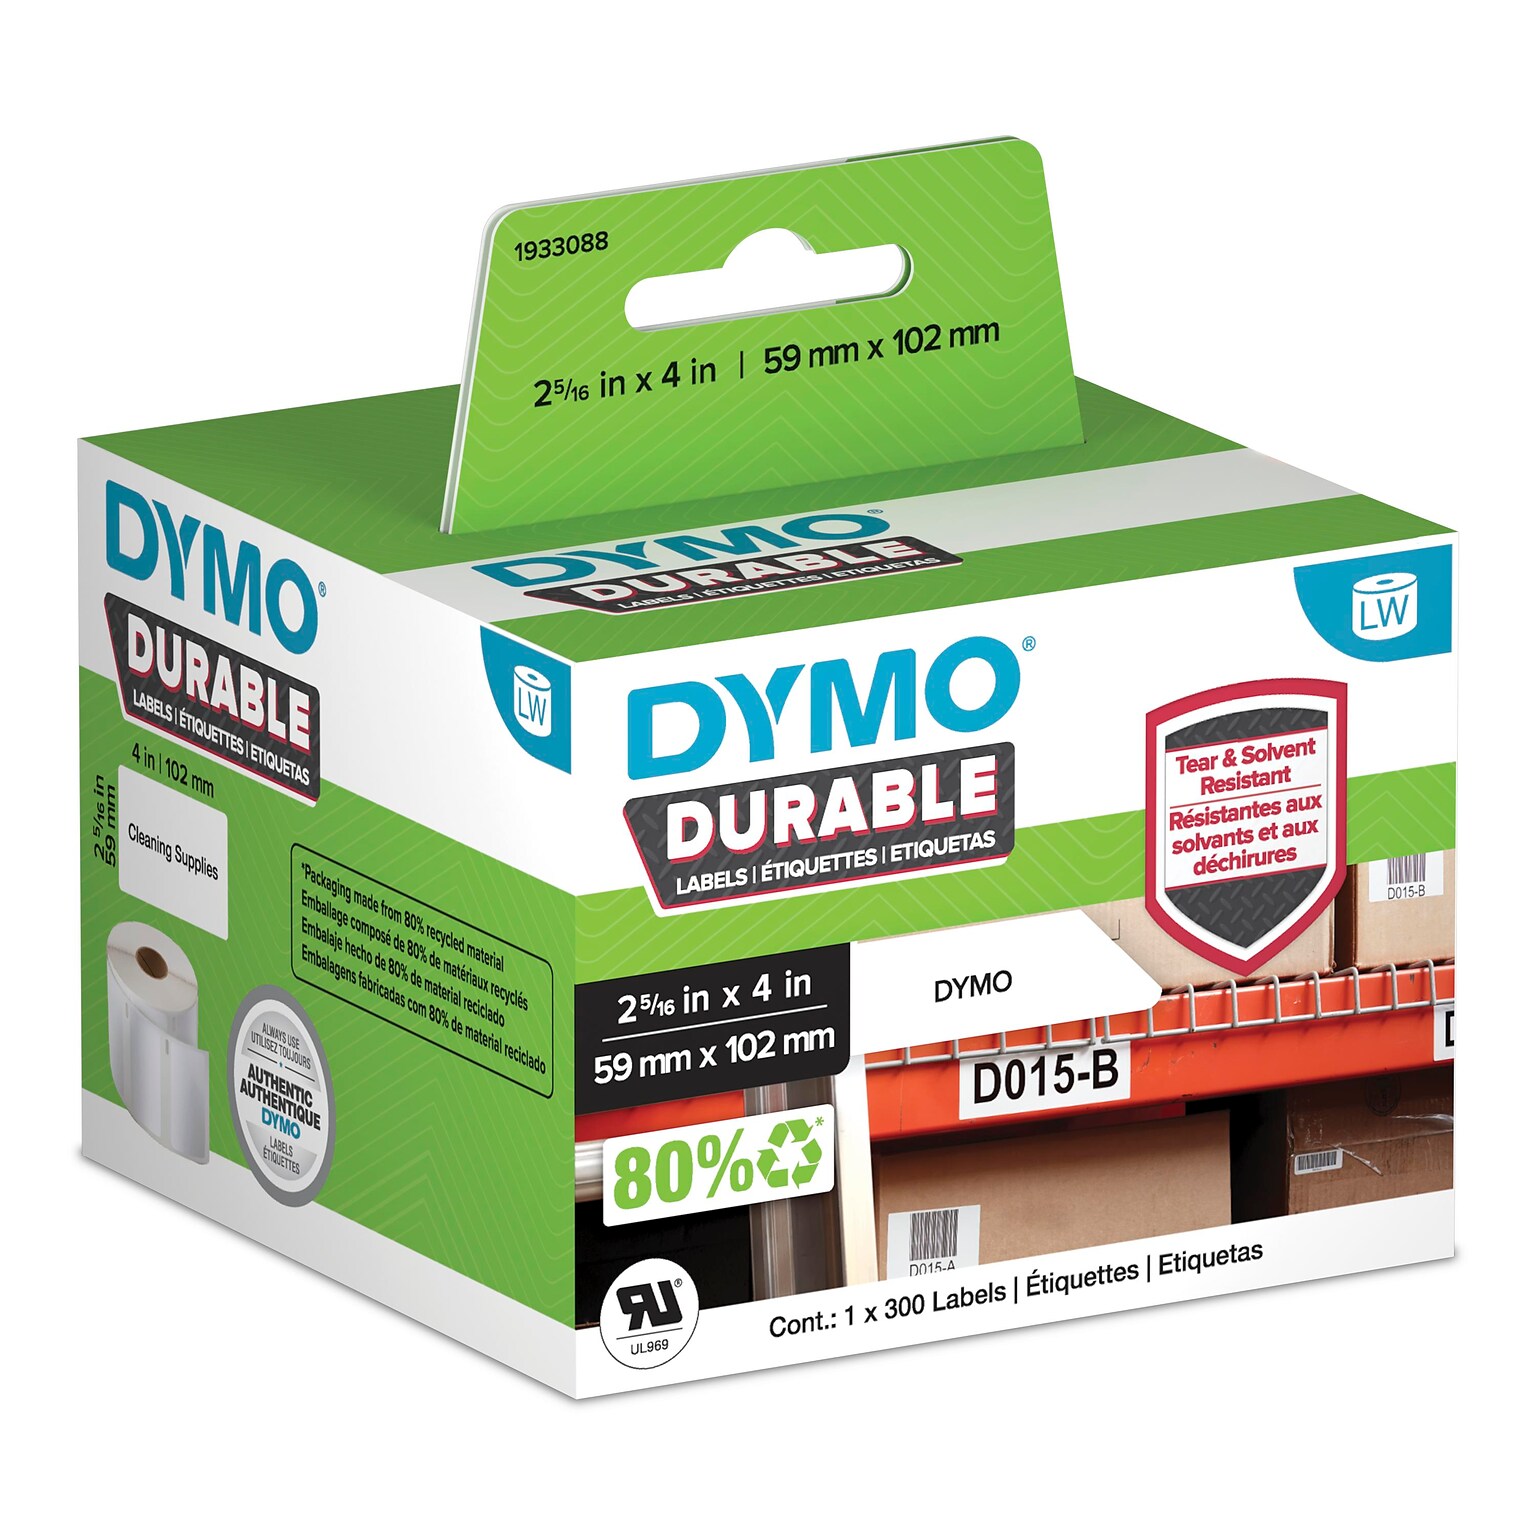 DYMO LabelWriter 1933088 Durable Industrial Labels, 4 x 2-5/16, Black on White, 300 Labels/Roll (1933088)